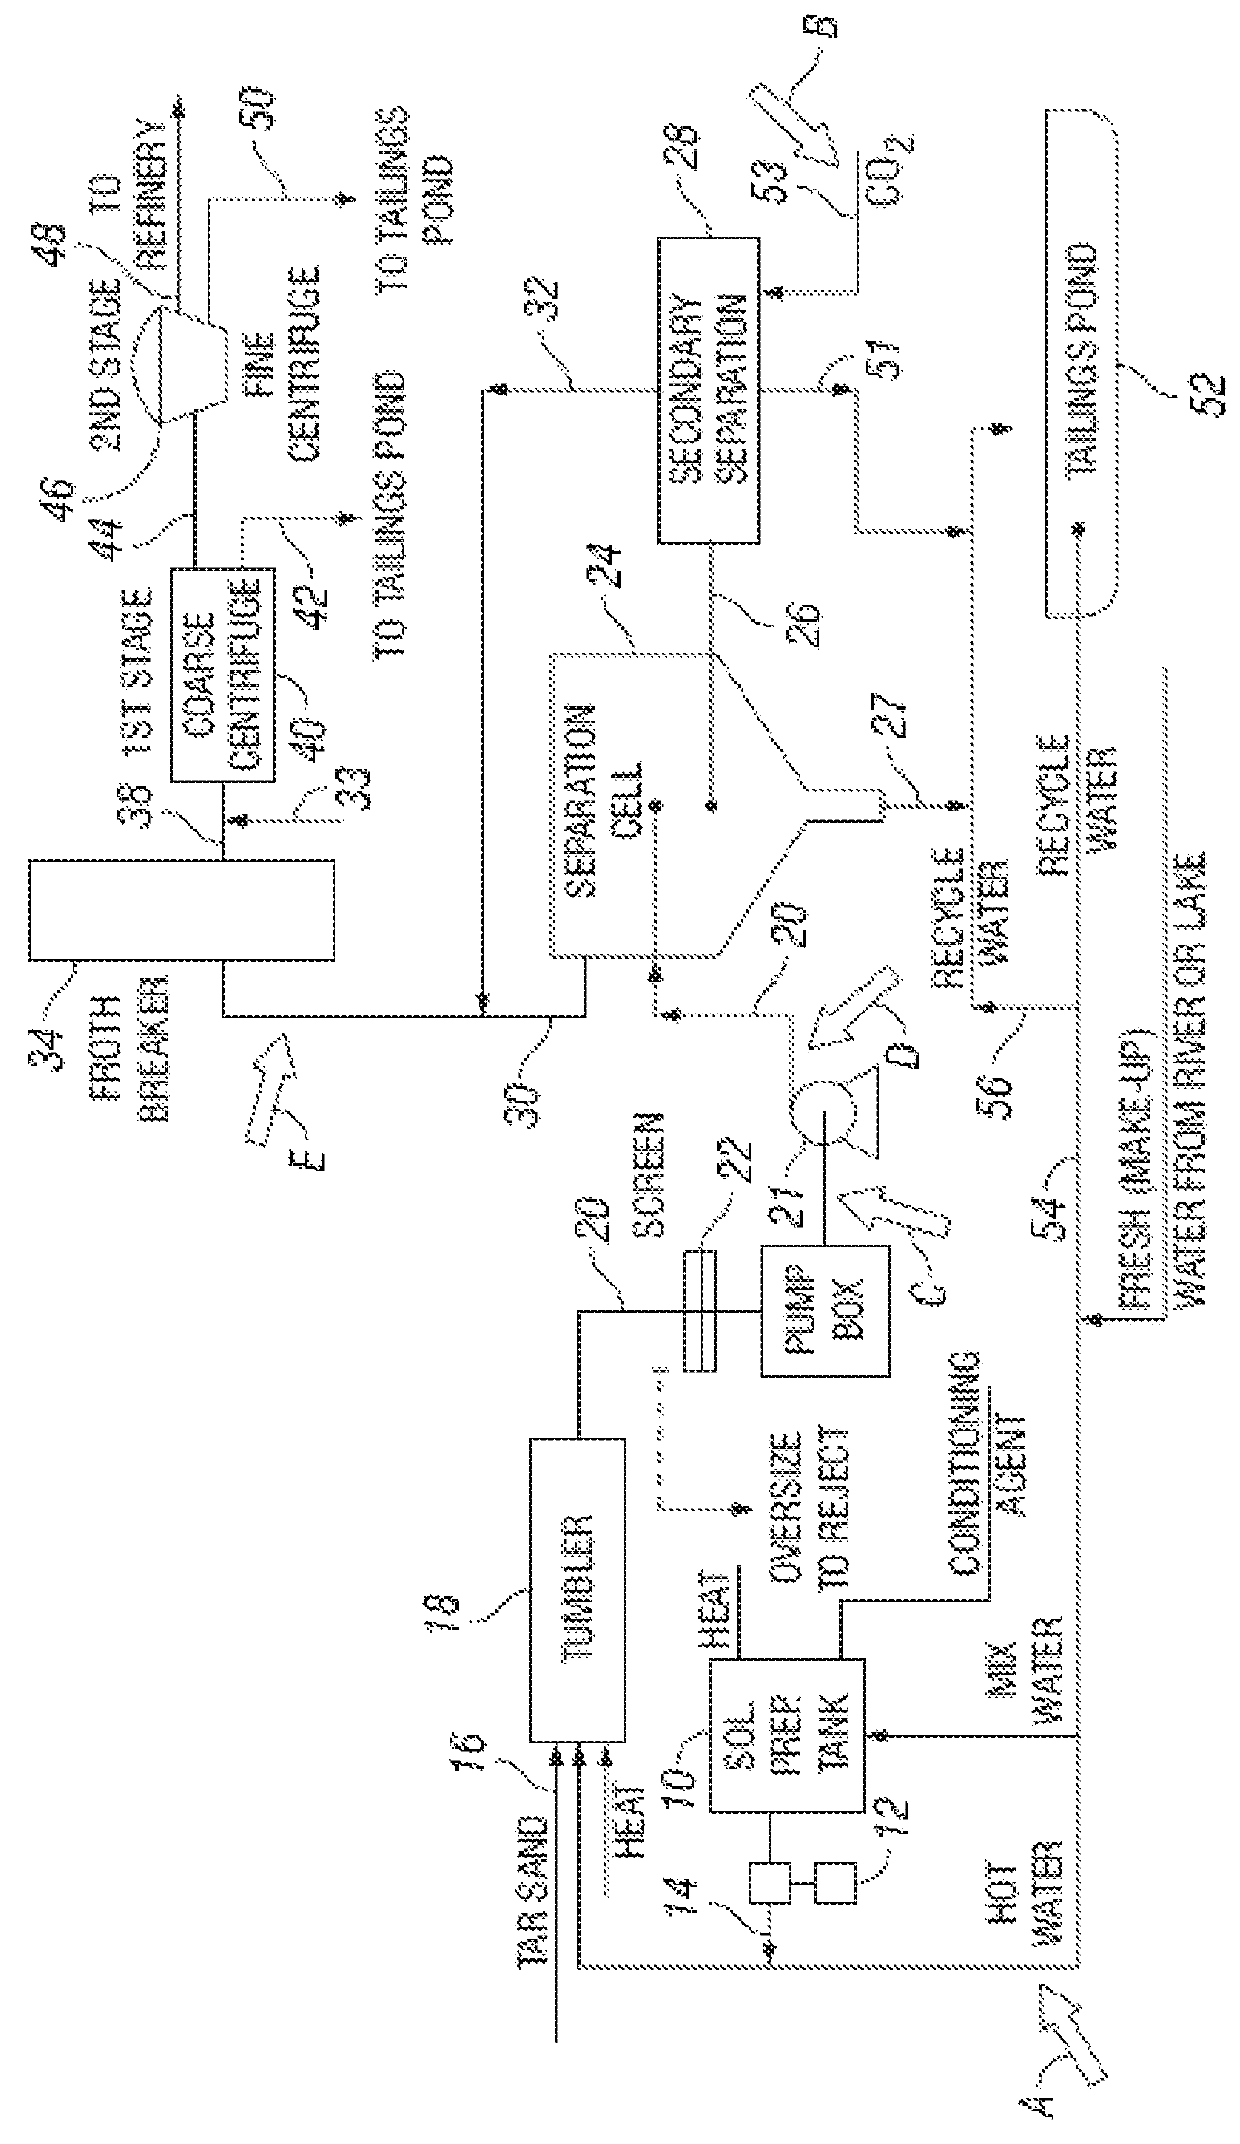 Method of high shear comminution of solids